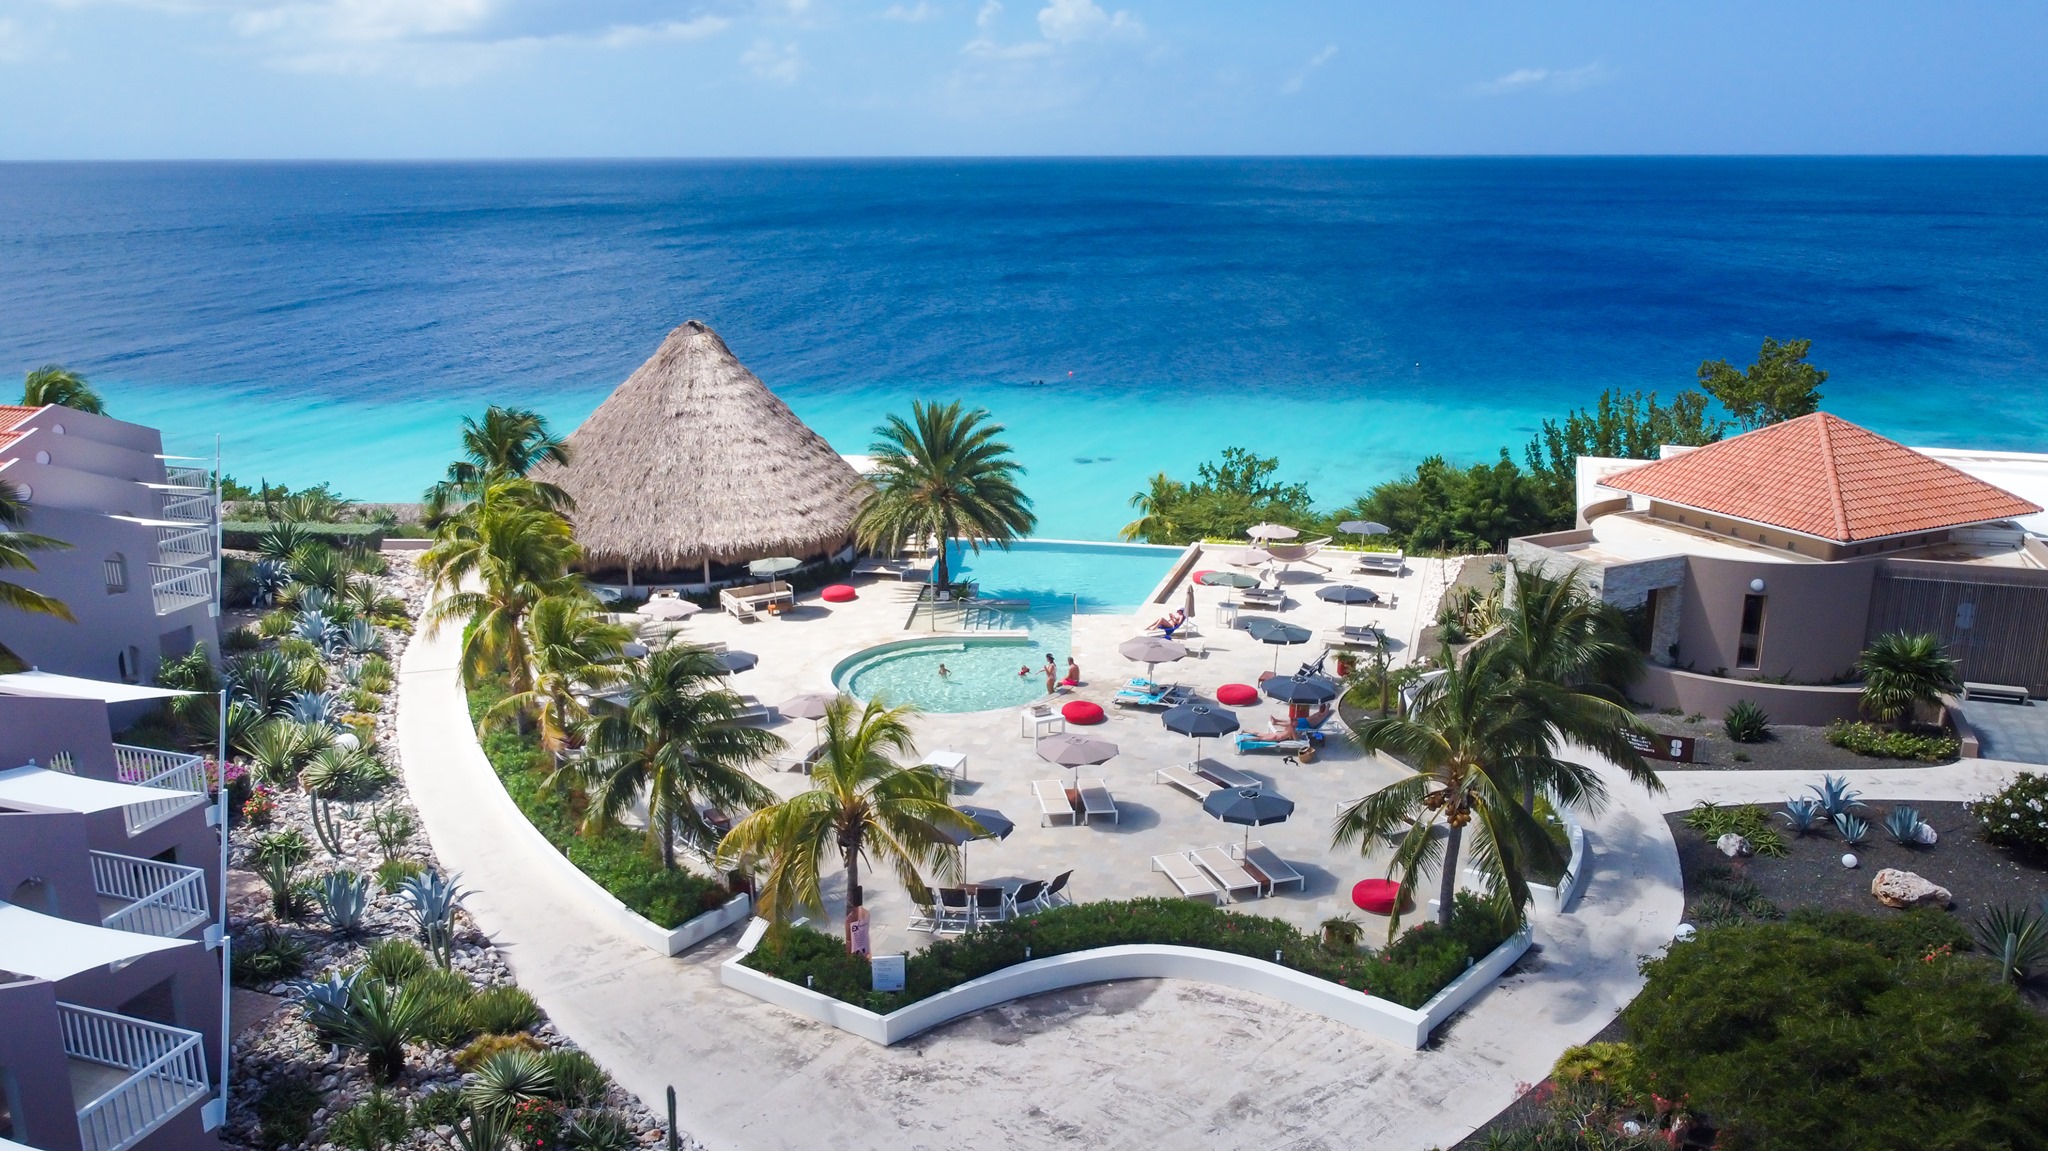 Best Party All Inclusive Resorts in The Caribbean